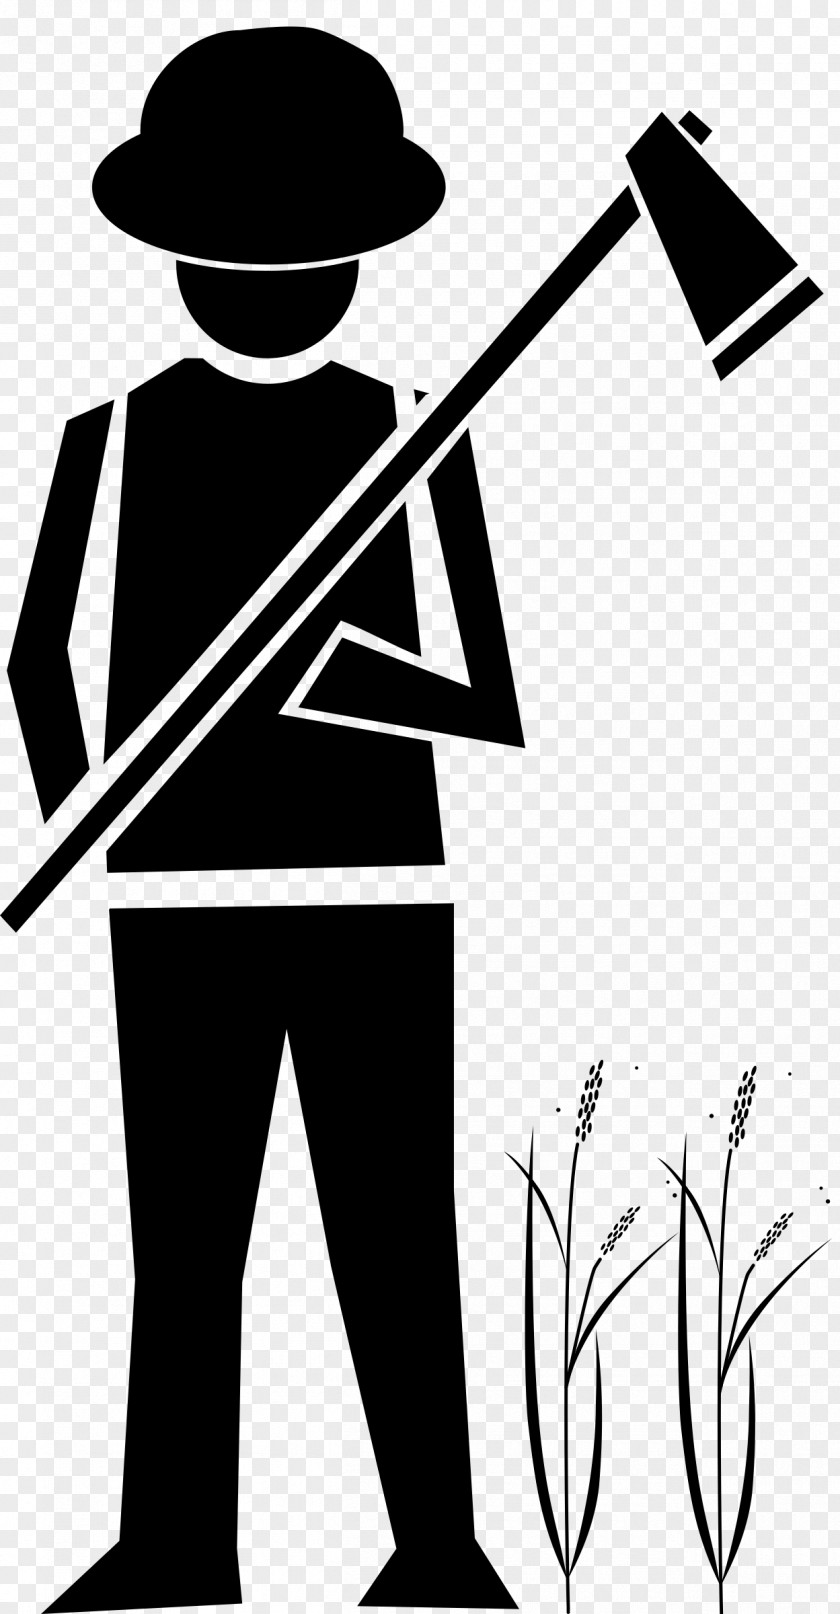 Paddy Farmer Agriculture Clip Art PNG